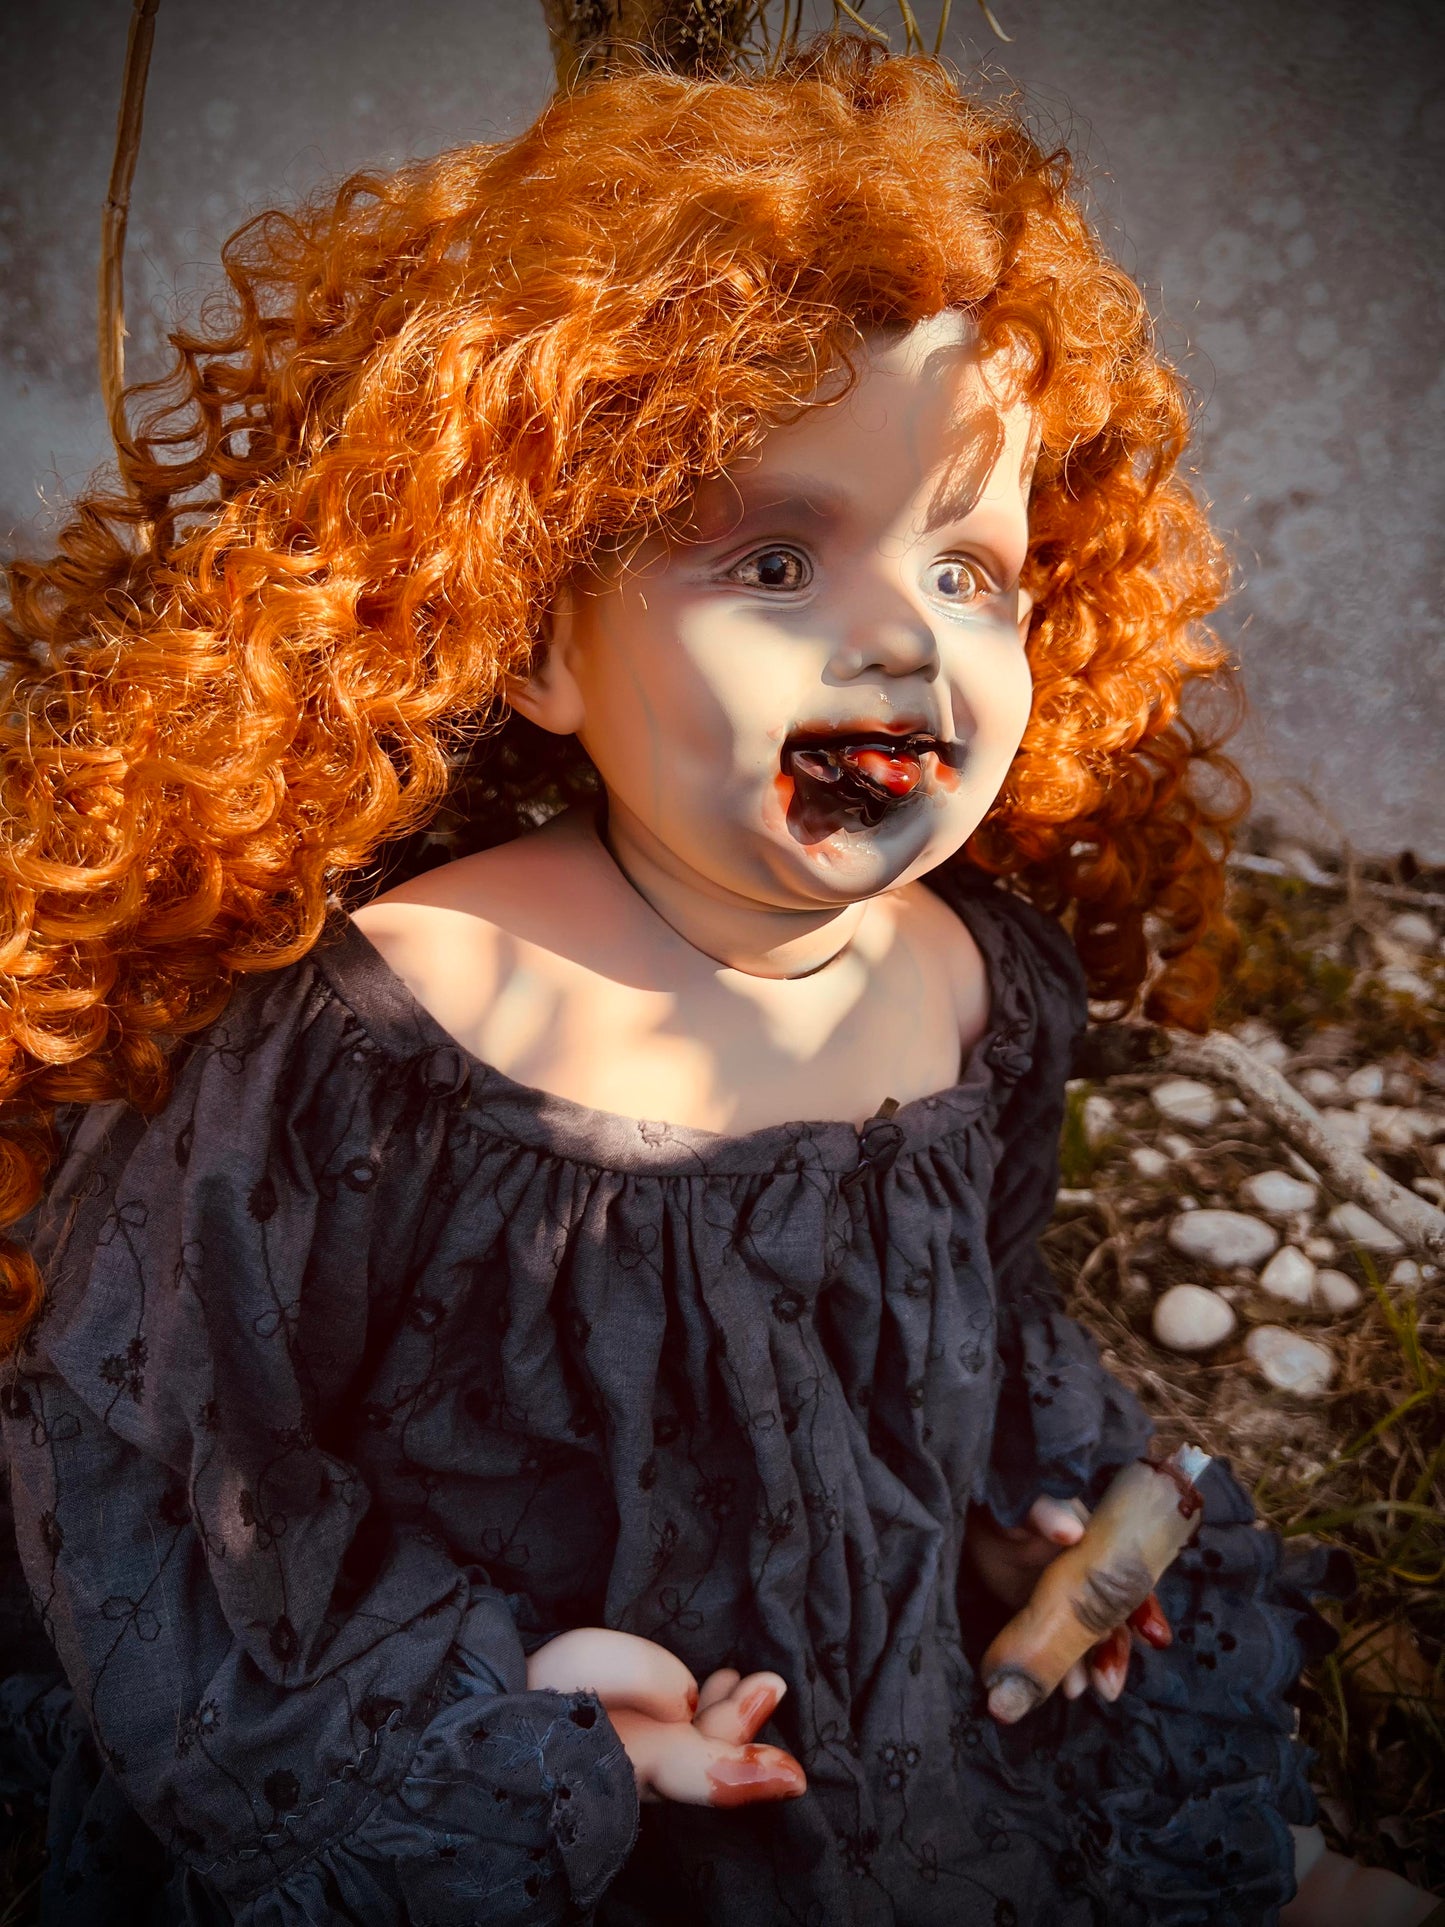 Meet Hazel 29" Vintage Baby Porcelain Ginger Witchy Haunted Spirit Infected Zombie Doll Scary Poltergeist Halloween Spooky Hand Painted